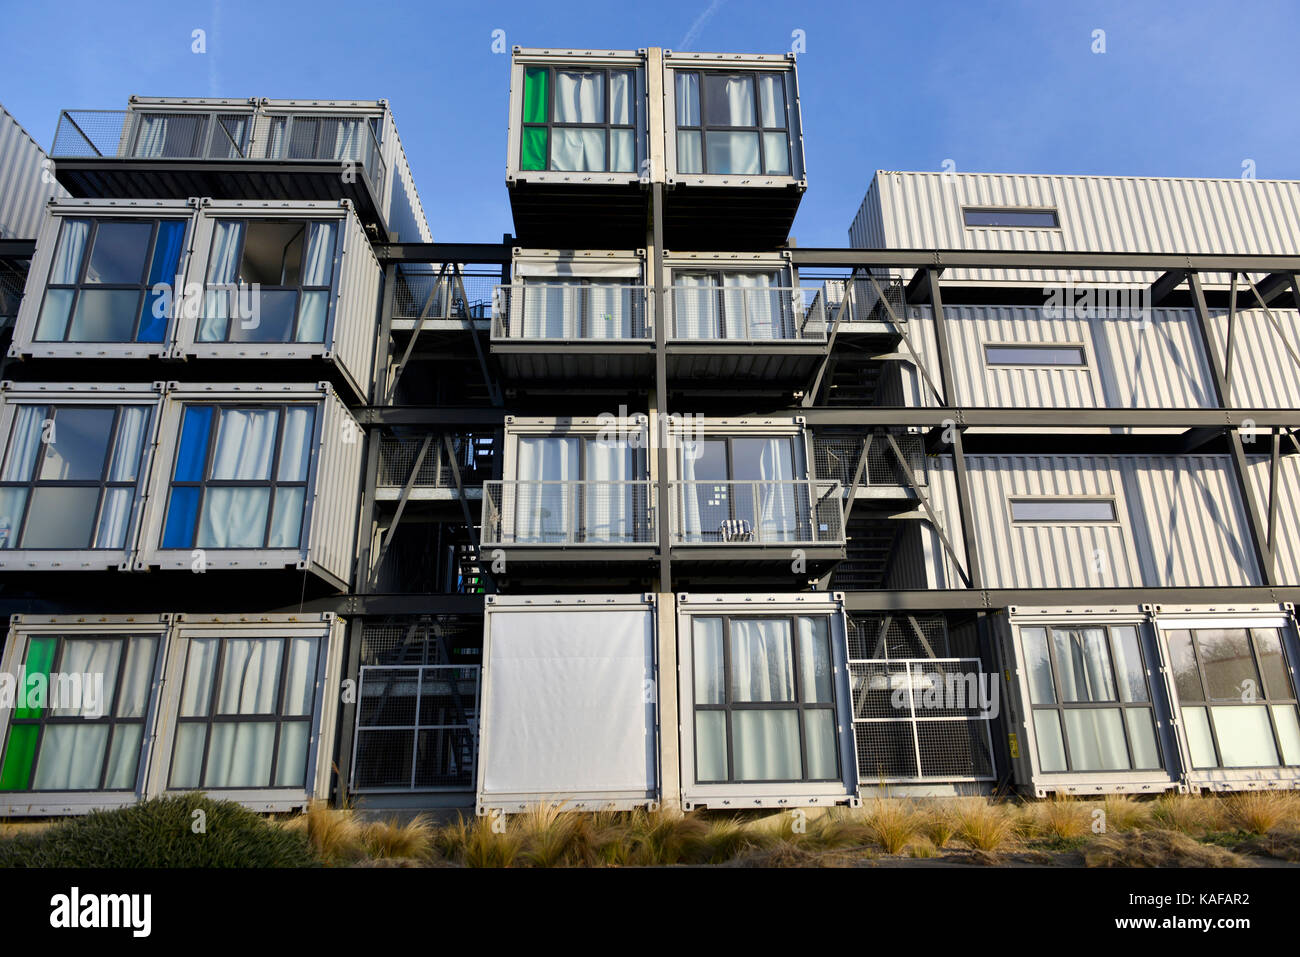 Le Havre (Normandy region, north western France): university accommodation A'Docks. Student housing block made from piled up shipping containers, desi Stock Photo